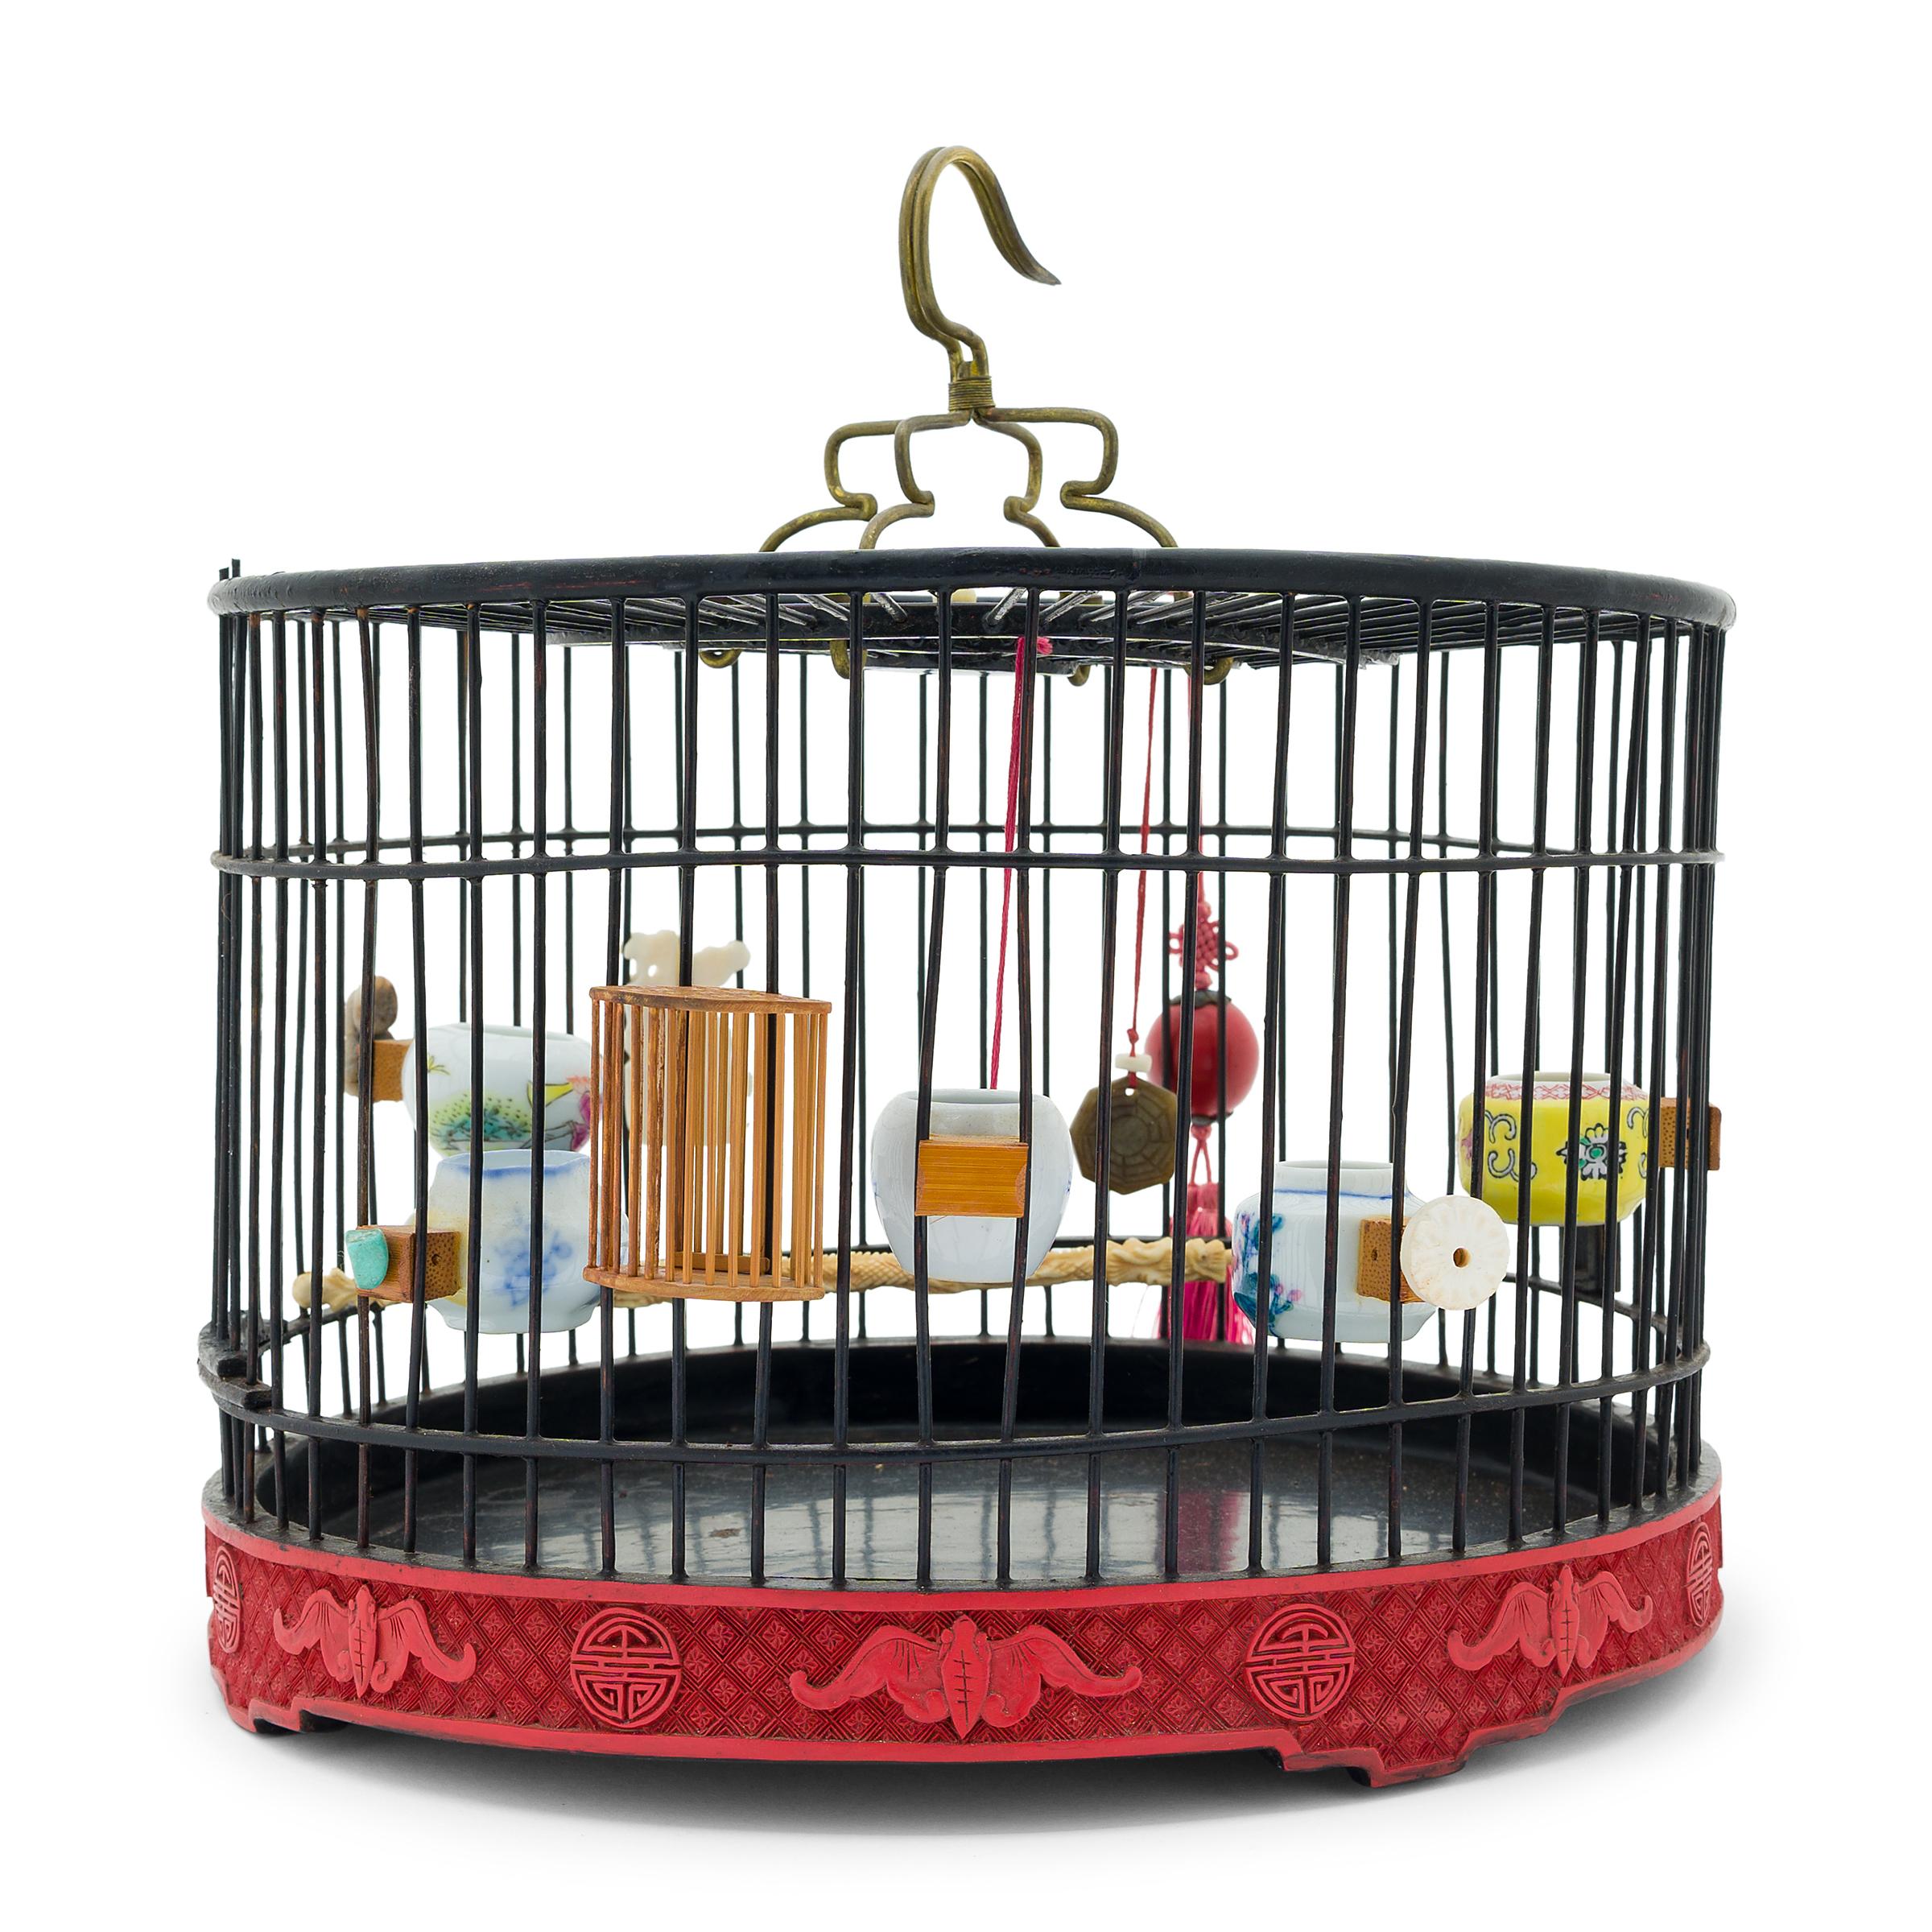 This delicate birdcage was once home to the tiny pet bird of a Qing-dynasty aristocrat. Dated to the late 19th century, the round cage has a cylindrical form carefully assembled from thin bamboo rods finished with black lacquer. The base is